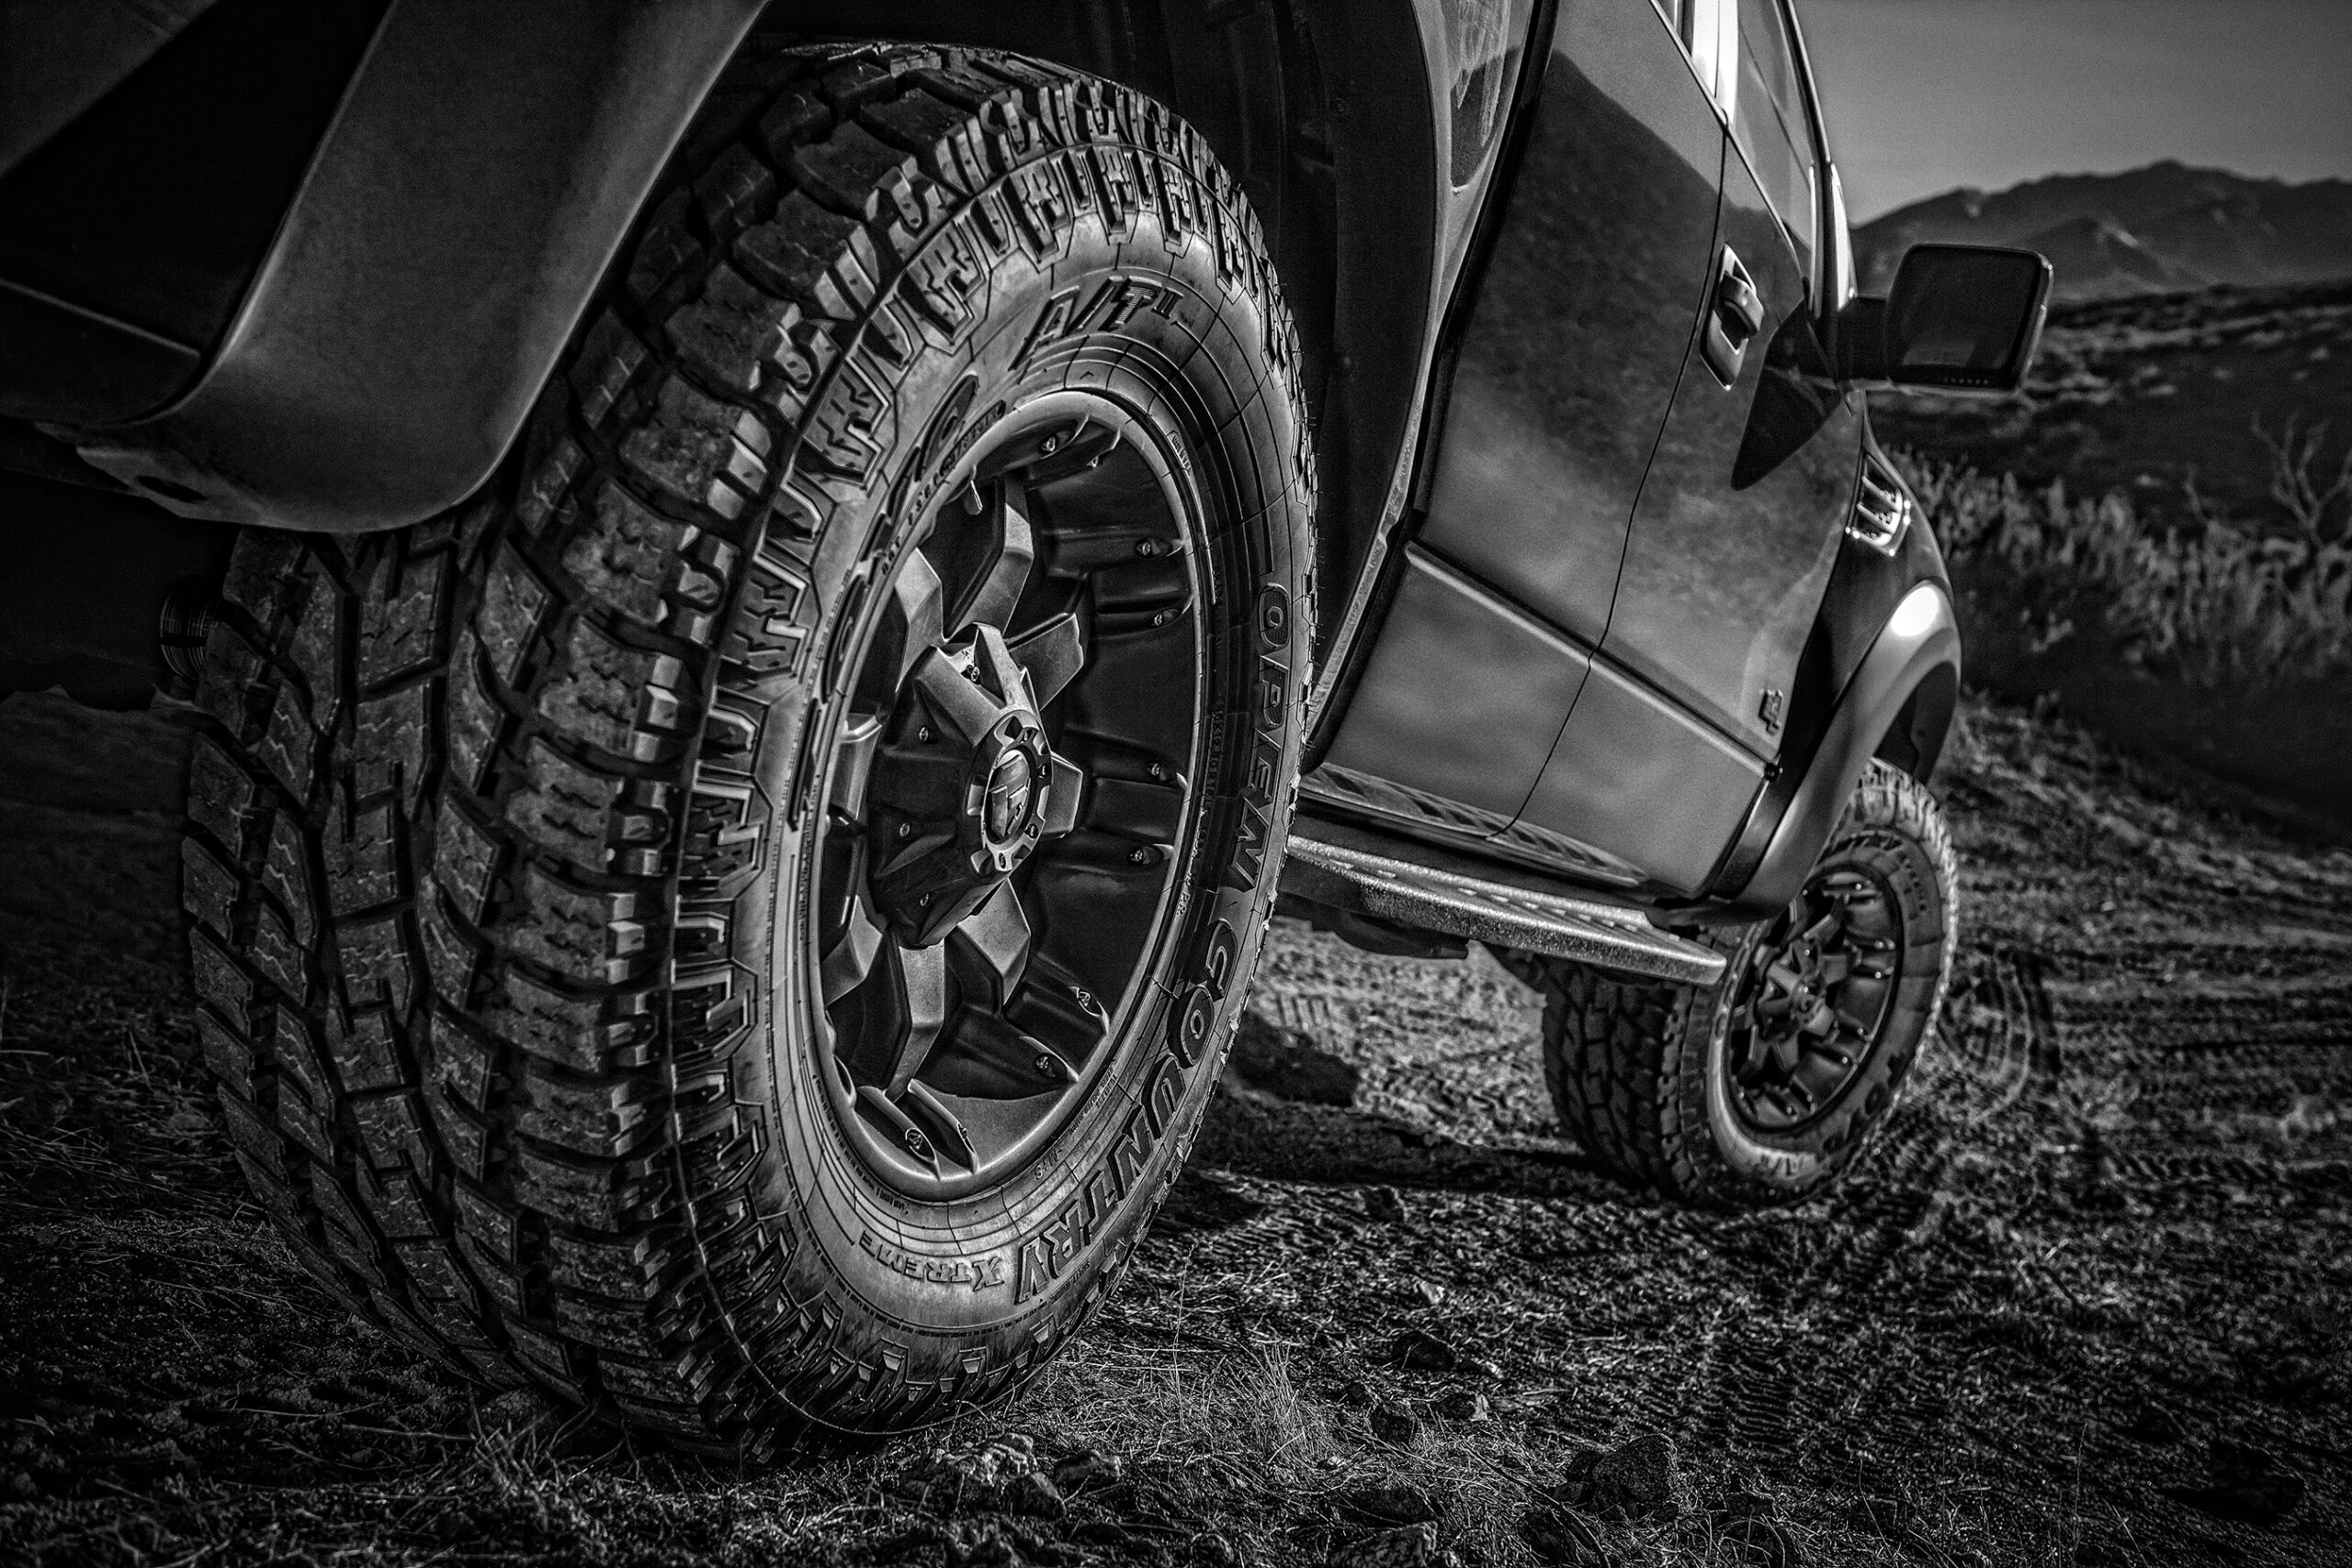 Aftermarket truck tires allow you to access locations standard tires will not.